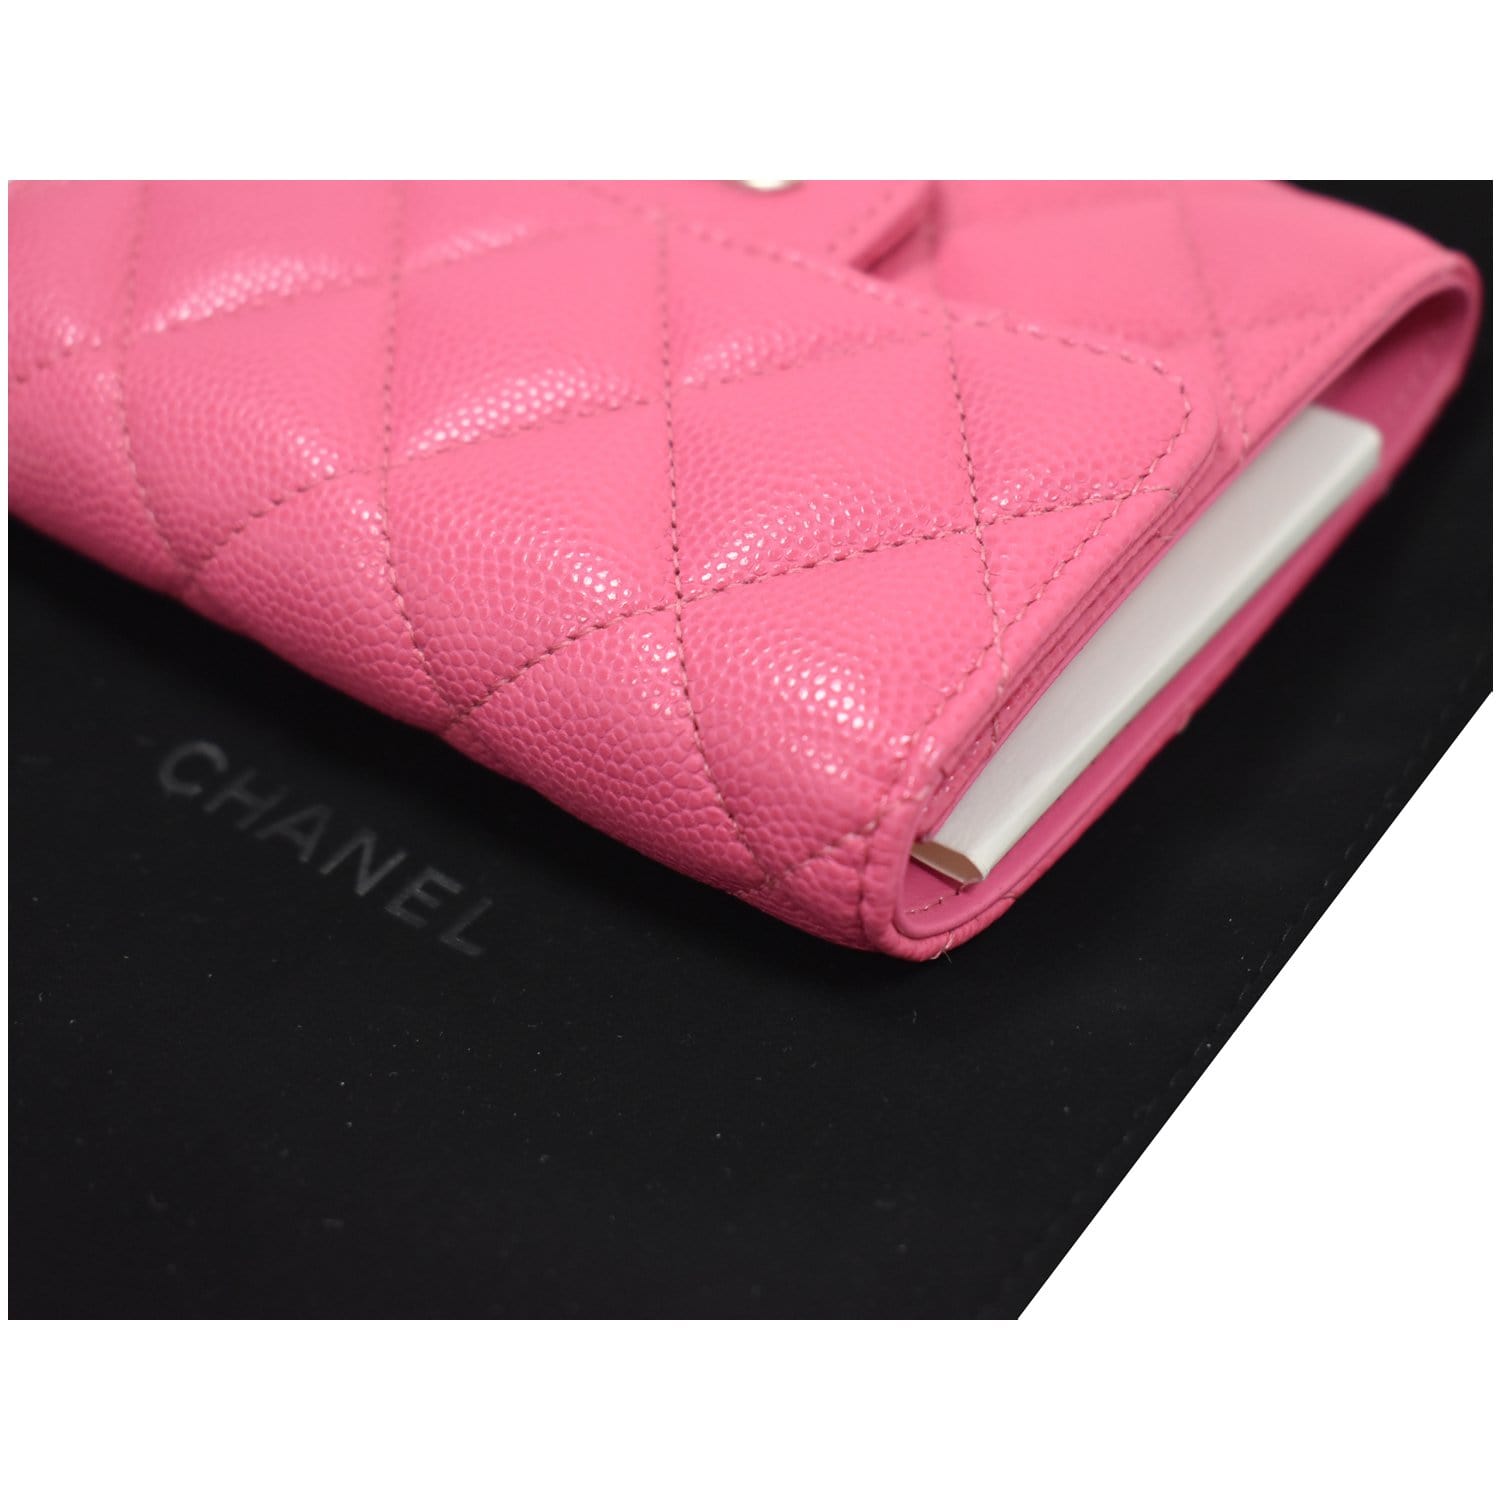 Chanel Pink Quilted Matte Caviar Leather Zippy Compact Wallet